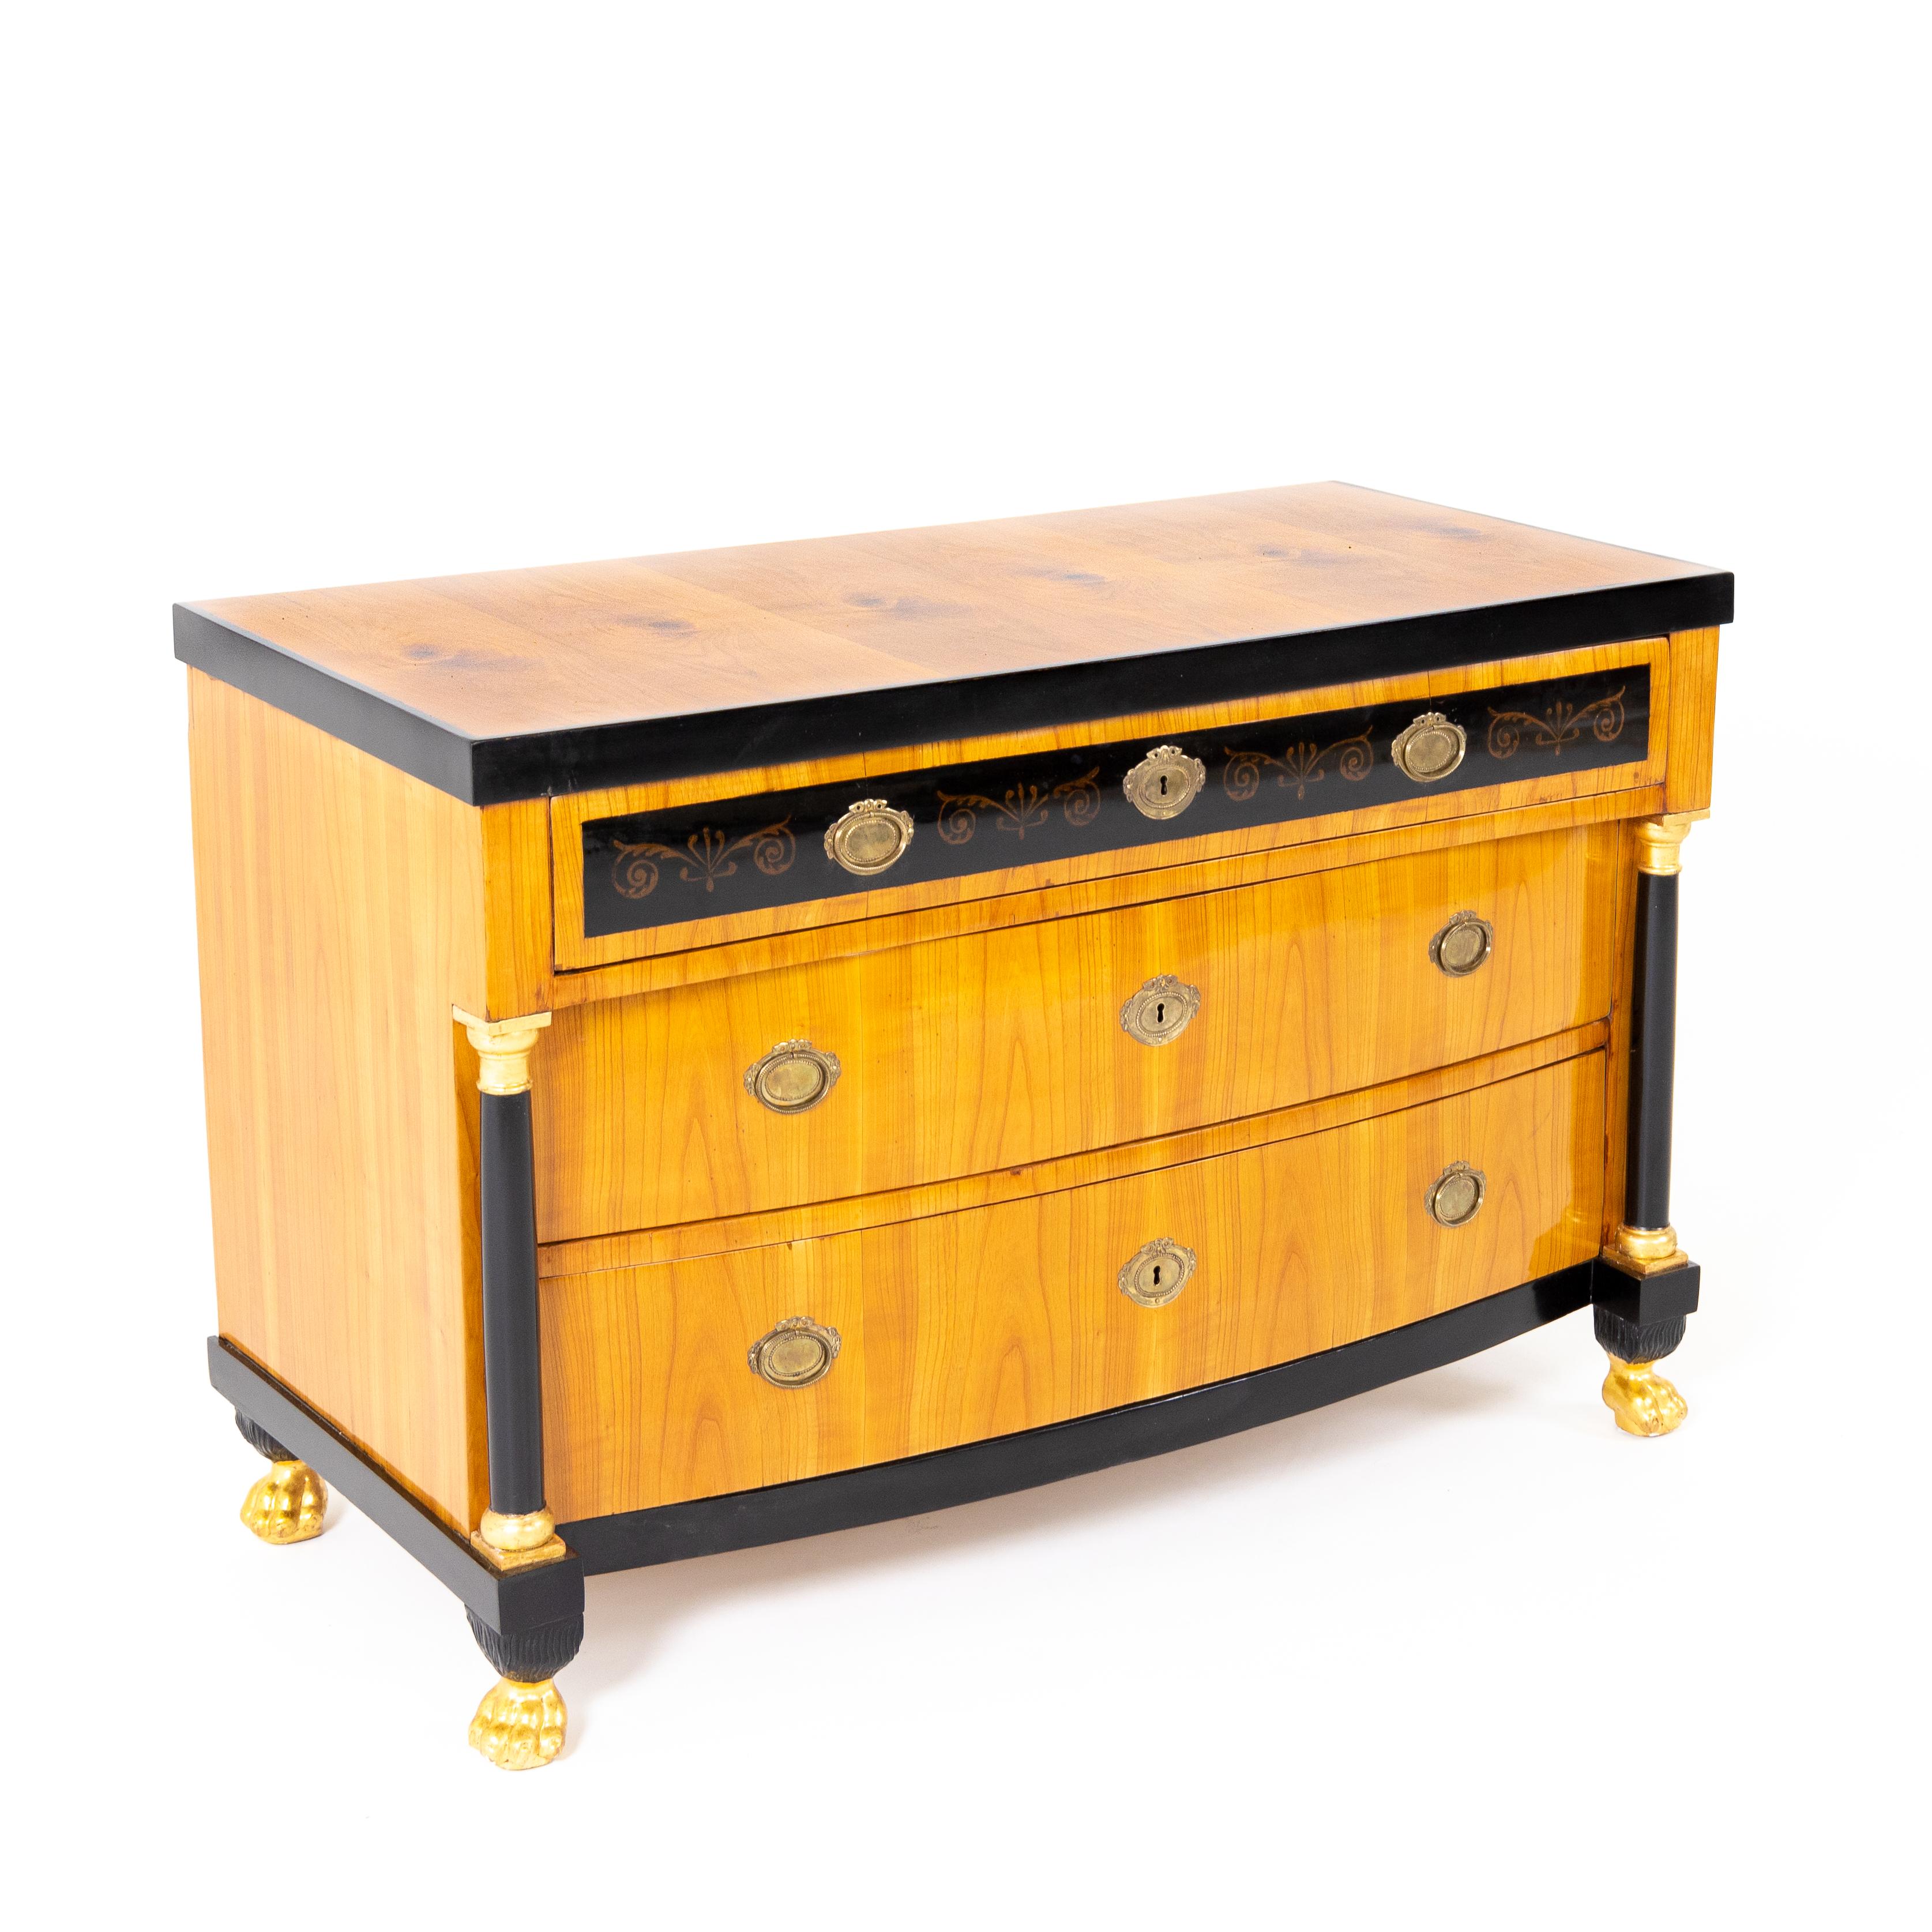 Three-drawered chest of drawers on gold-patinated paw feet, with bow front and ebonized columns with gilded capitals. The top drawer rests on the columns and is painted with vines against an ebonized ground.